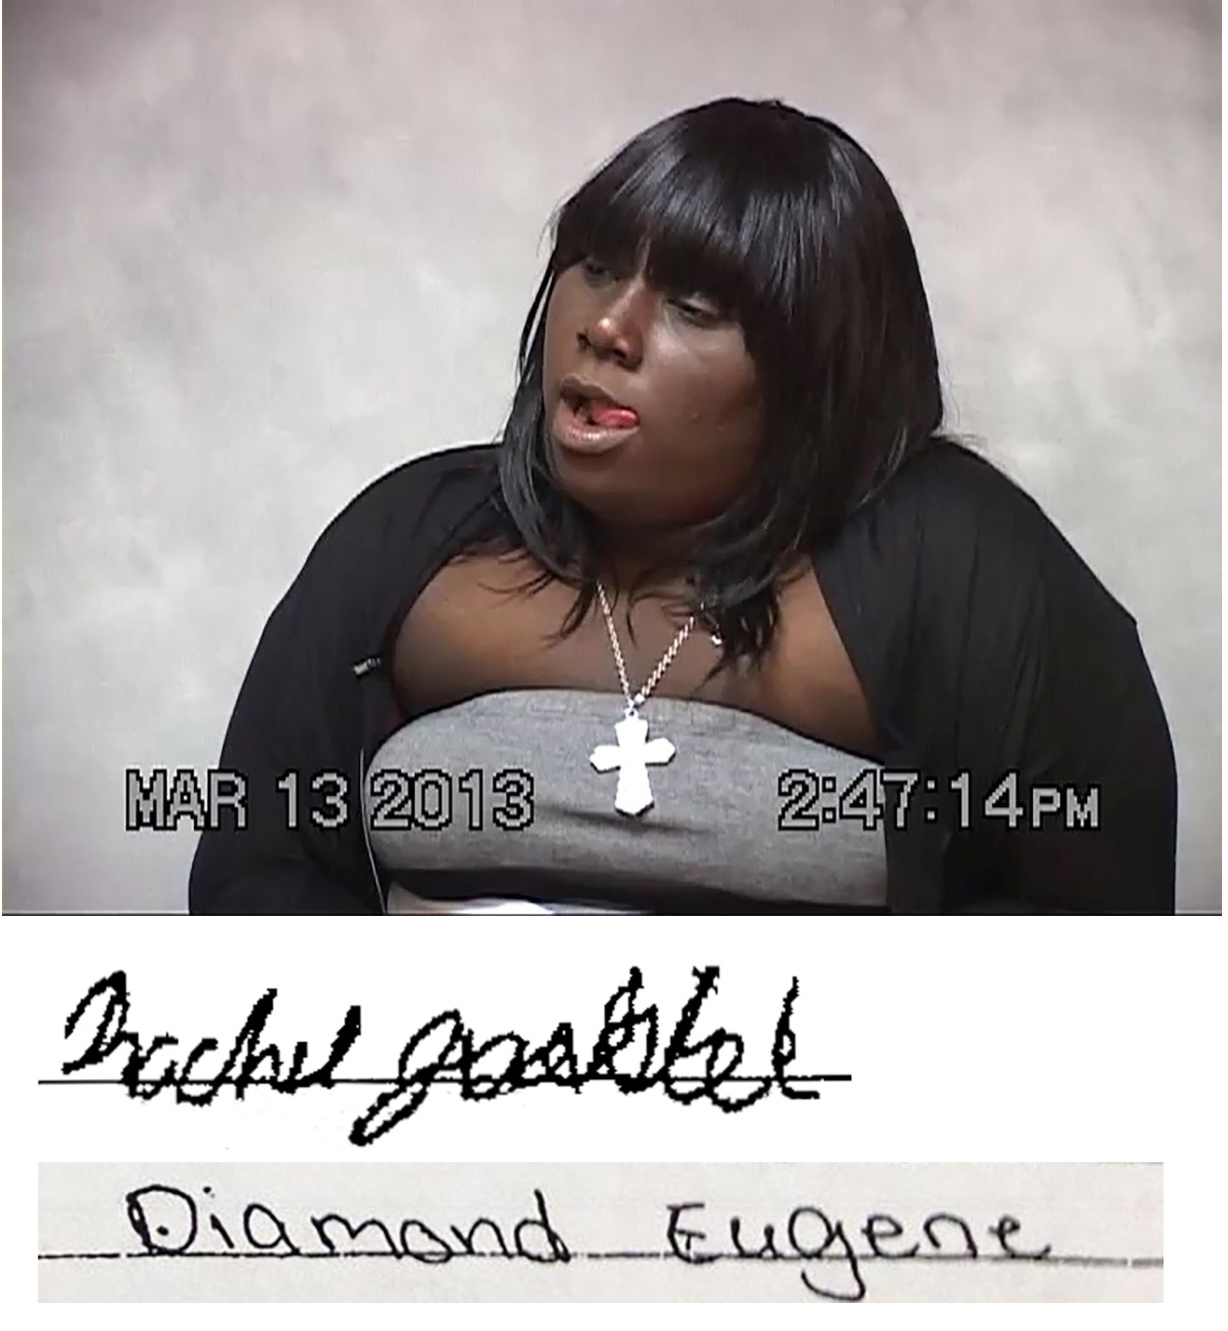 Rachel Jeantel, who testified in the Trayvon Martin case, and a comparison of her signature with that on a letter she says she signed (Joel Gilbert/The Trayvon Hoax)